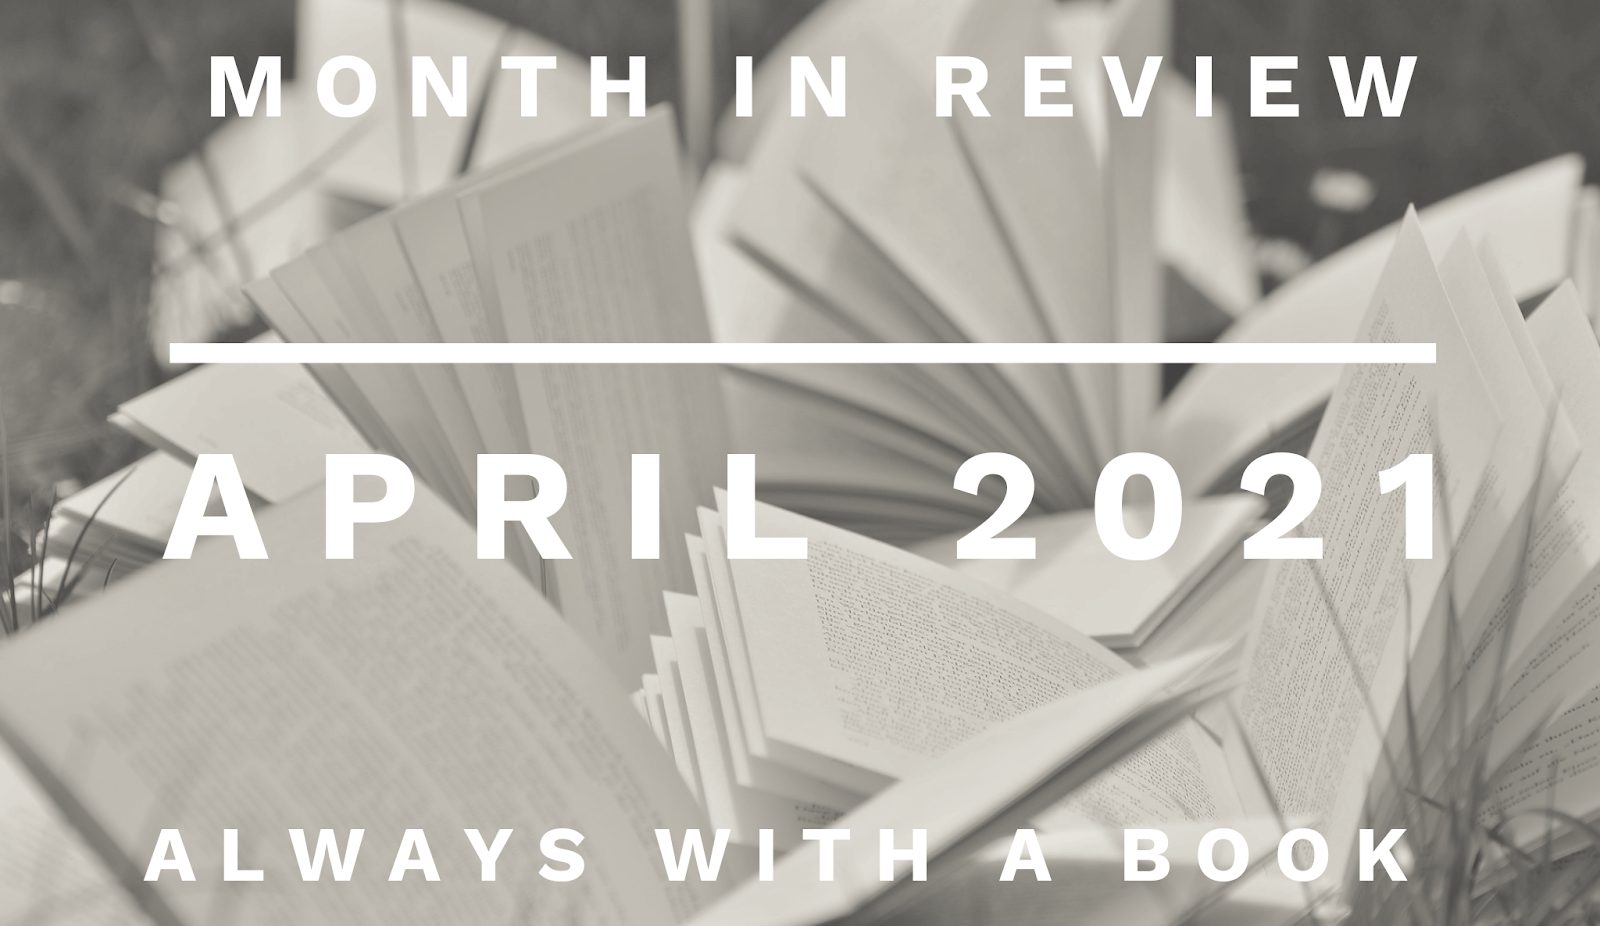 Month in Review: April 2021